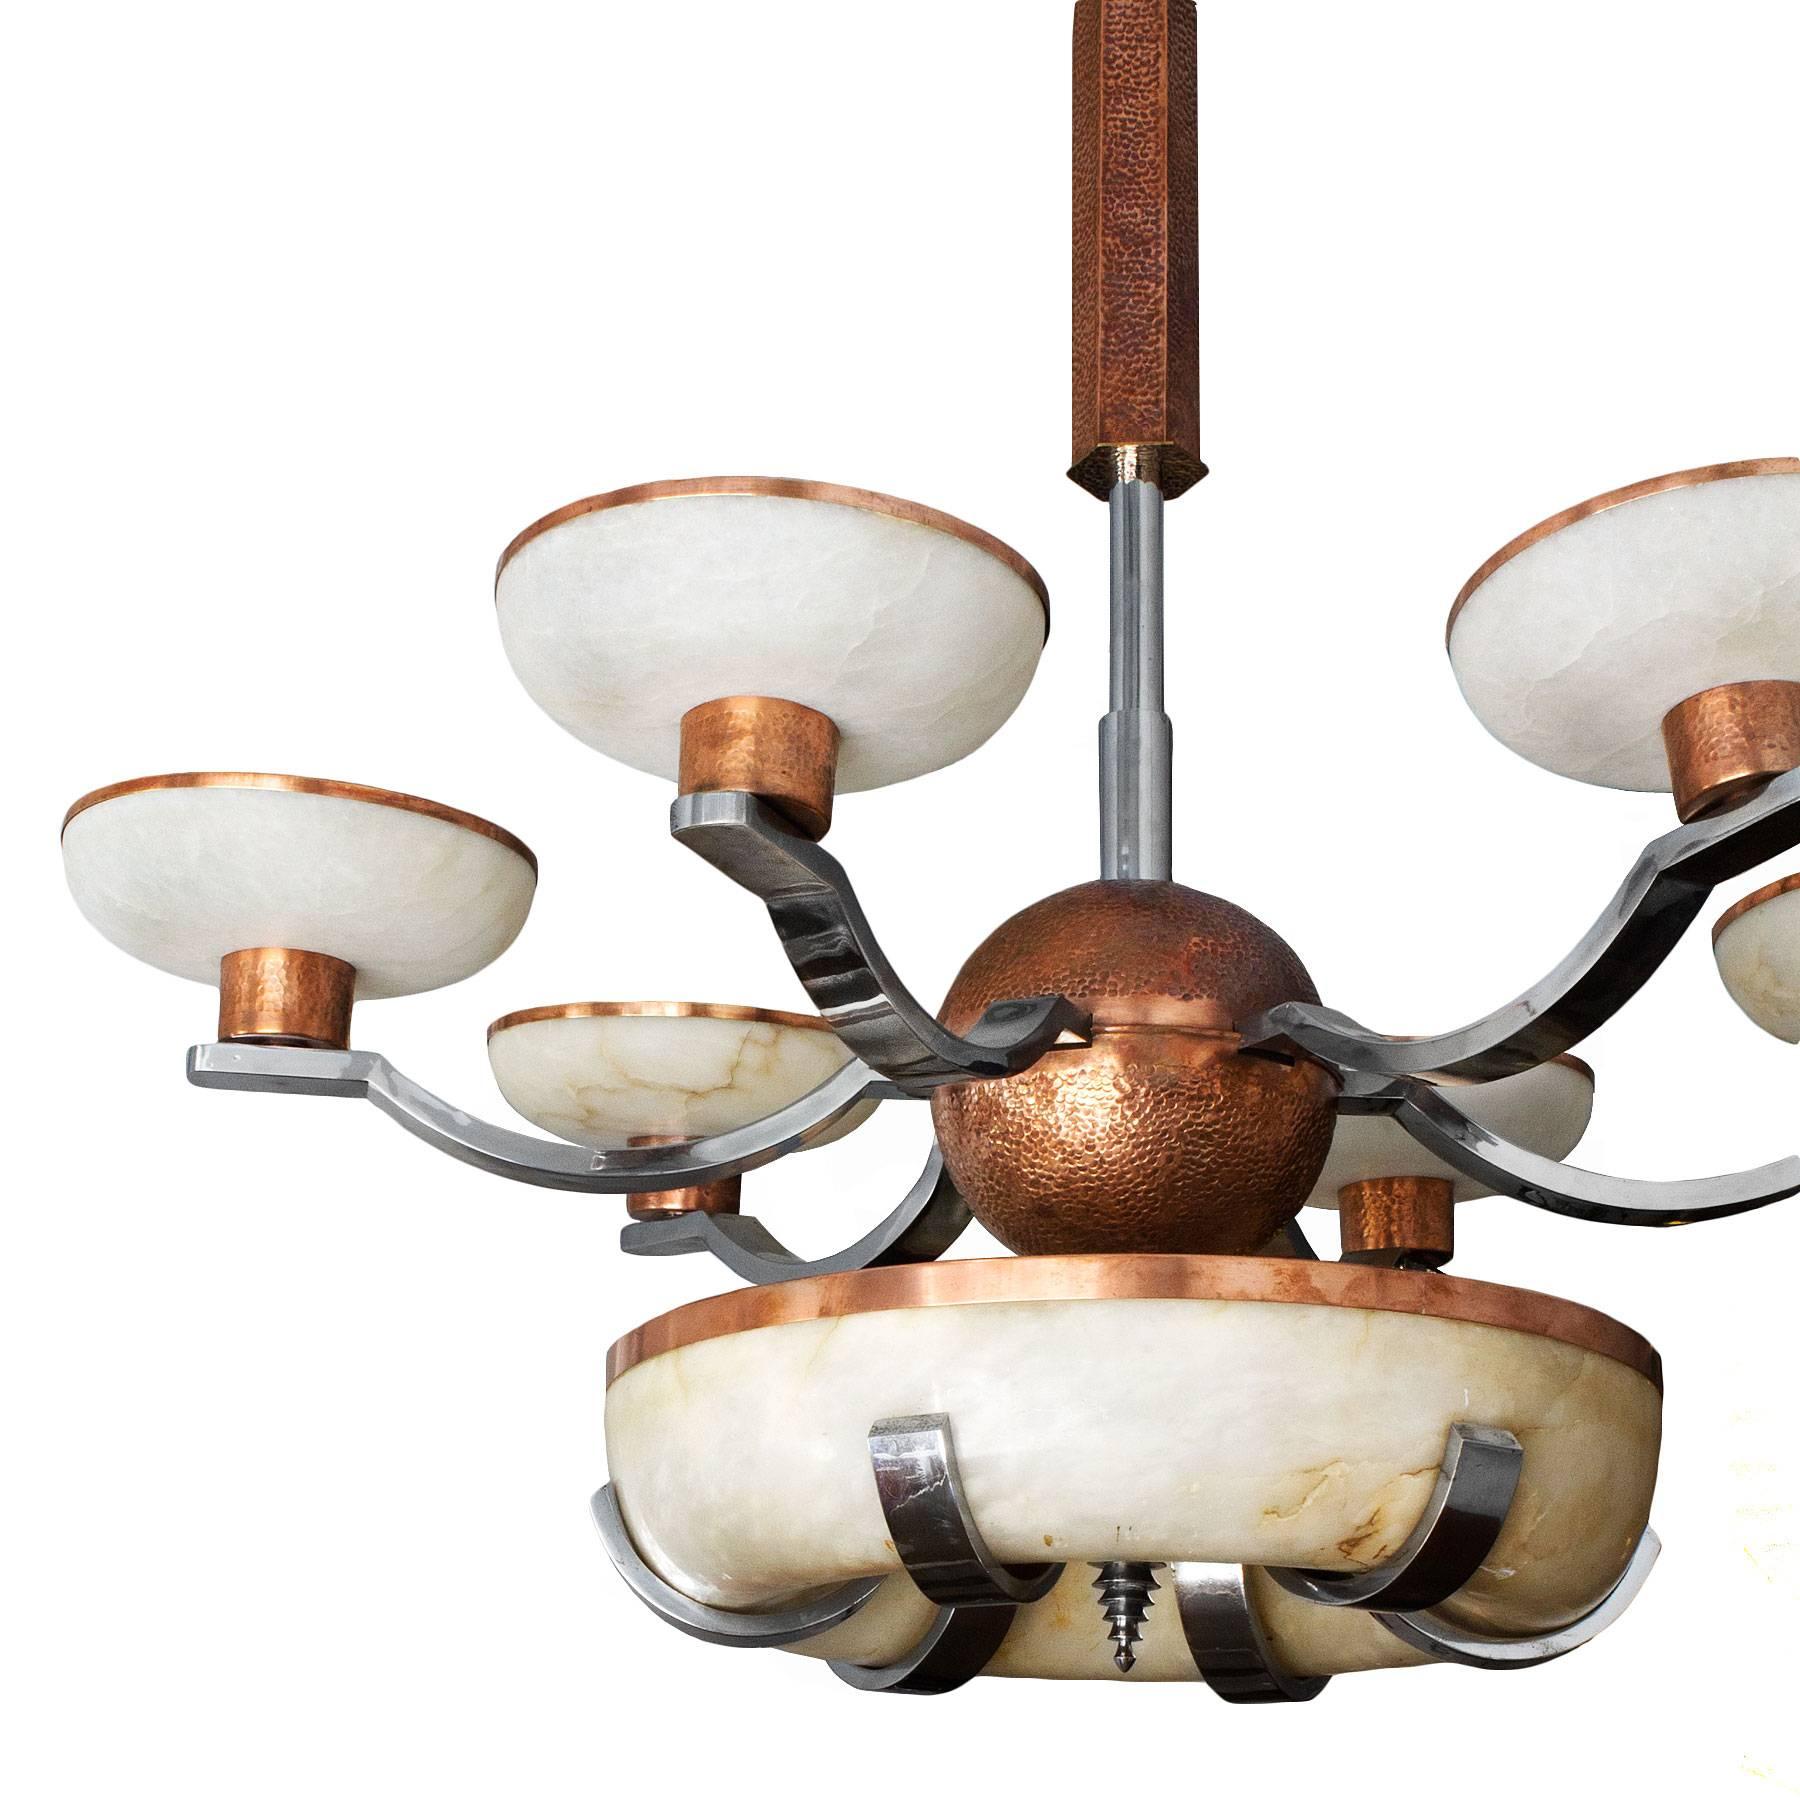 Monumental and spectacular Art Deco chandelier, six arms with small alabaster bowls and a big central bowl. Chrome-plated metal and hammered polished copper. Could be light the arms and the central bowl separately or together.

Spain, Barcelona,